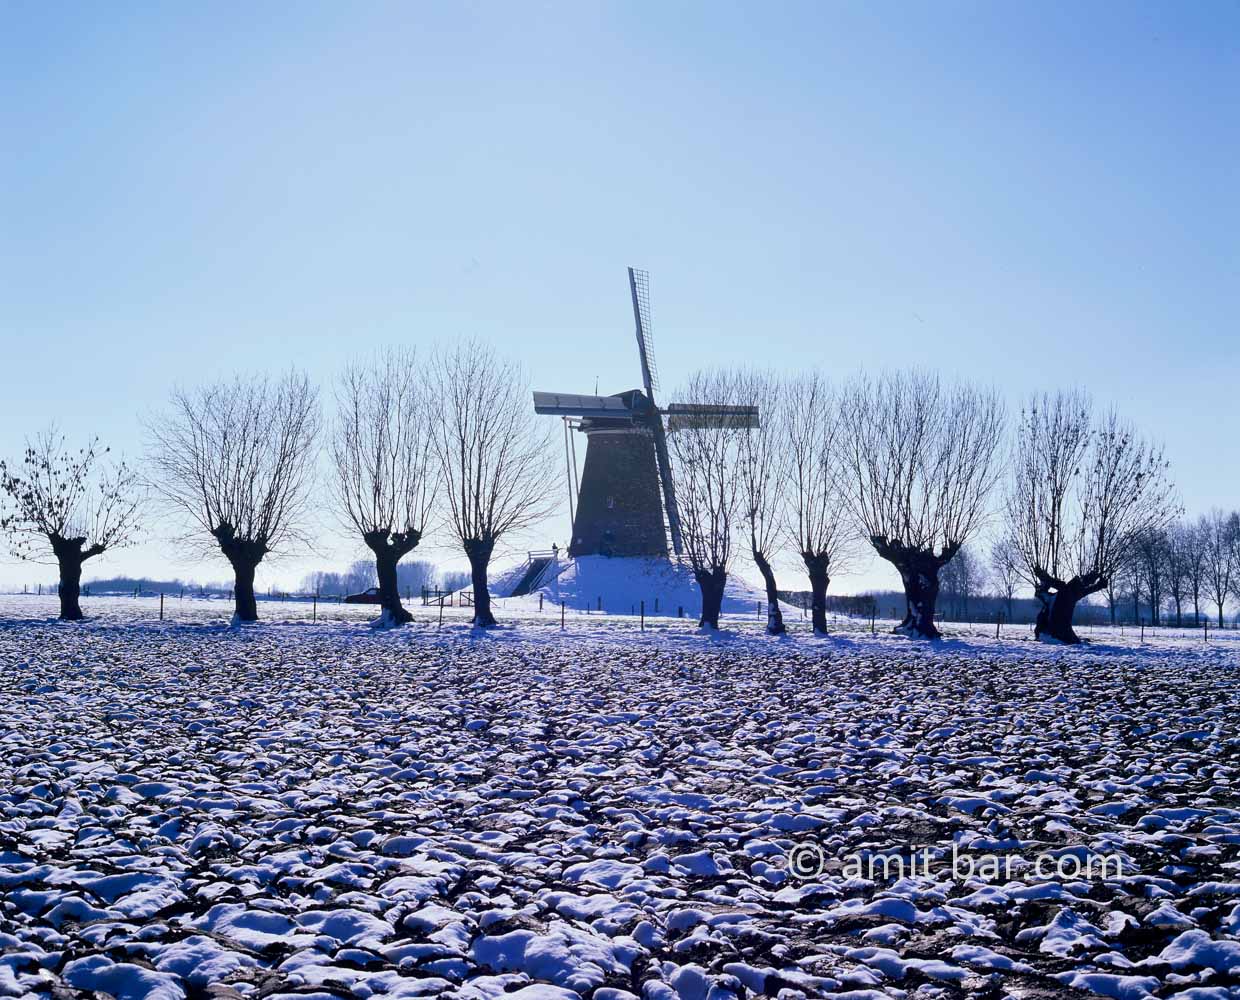 Snowy windmill: Windmill and willows in snow at Bronckhorst, The Netherlands